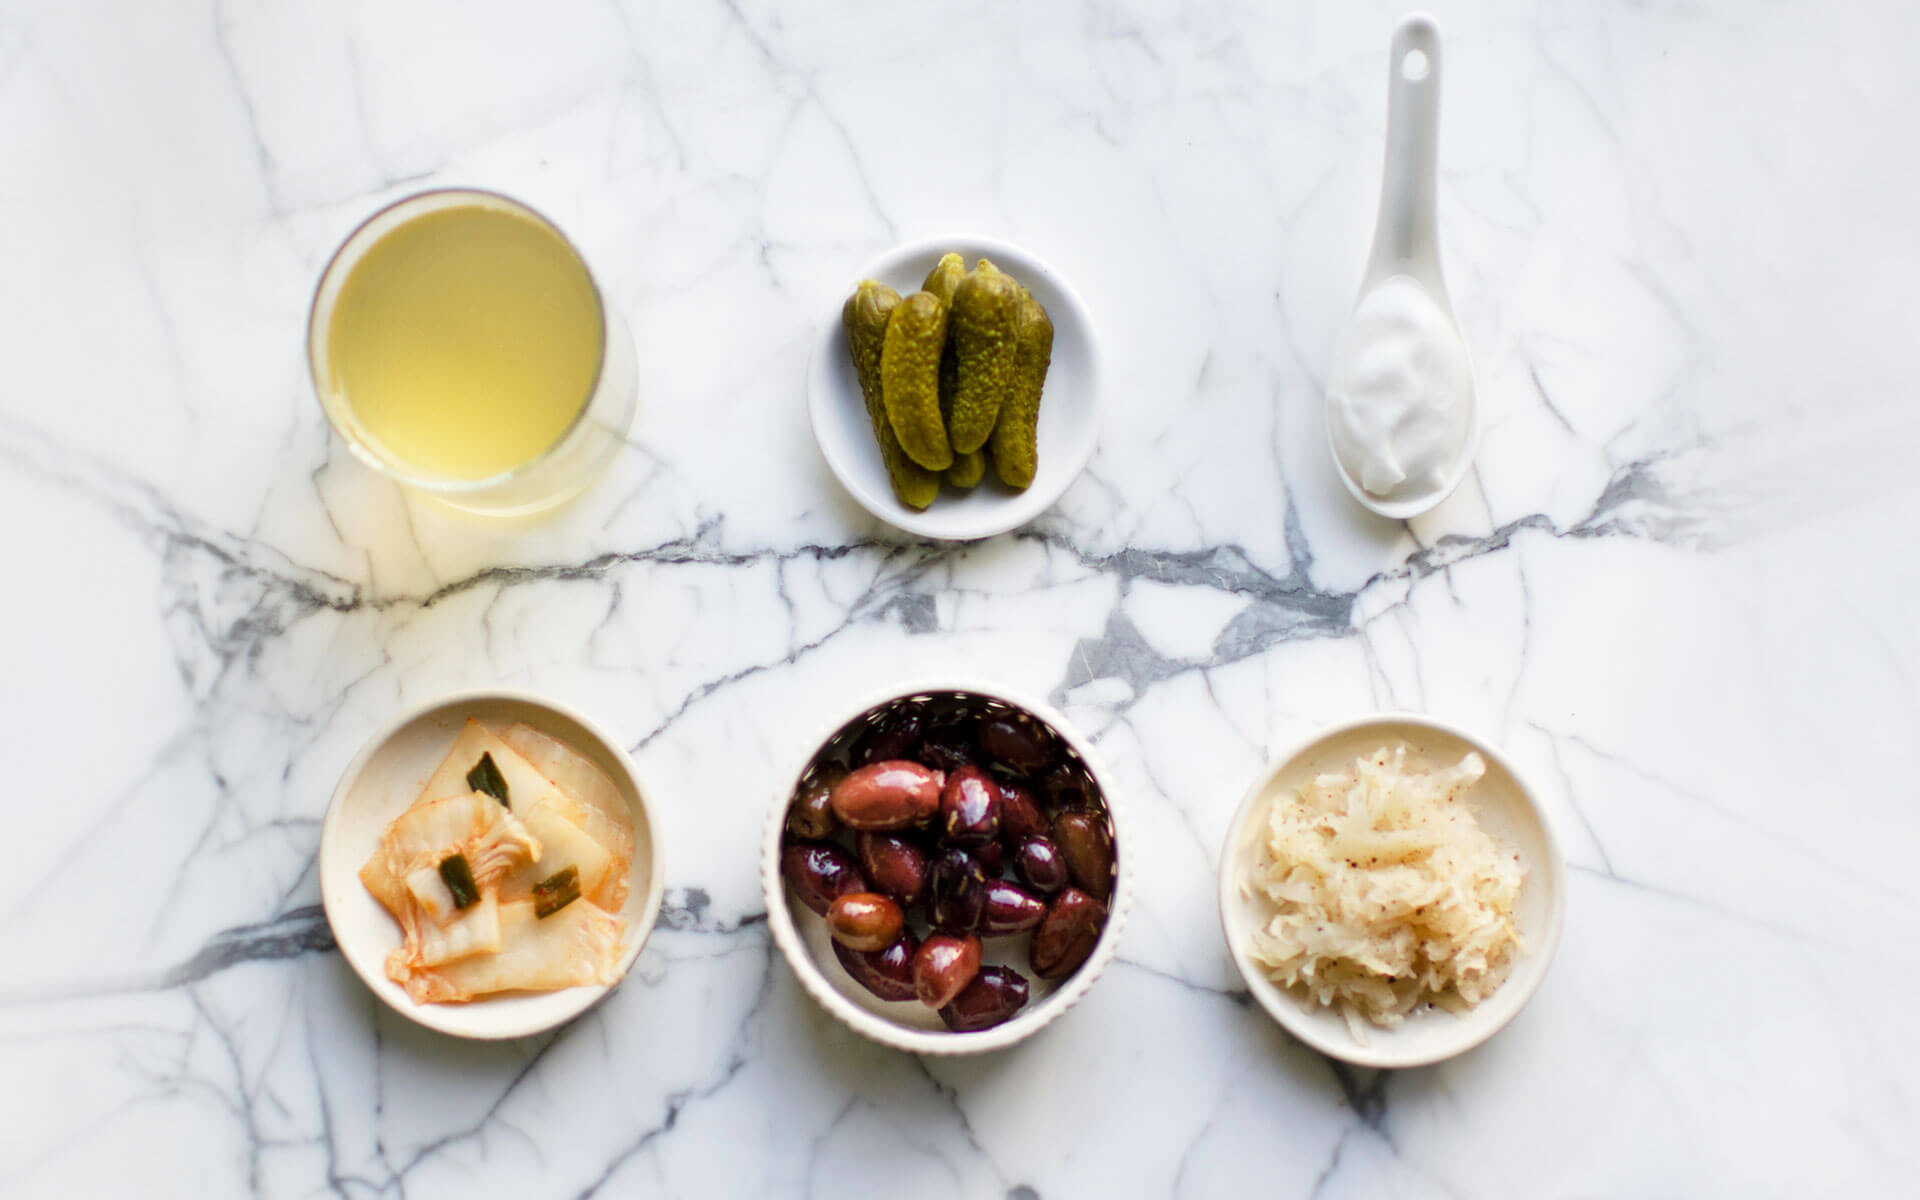 vinegar, pickles, yogurt, kimchi, olives and sauerkraut in bowls on a marble table